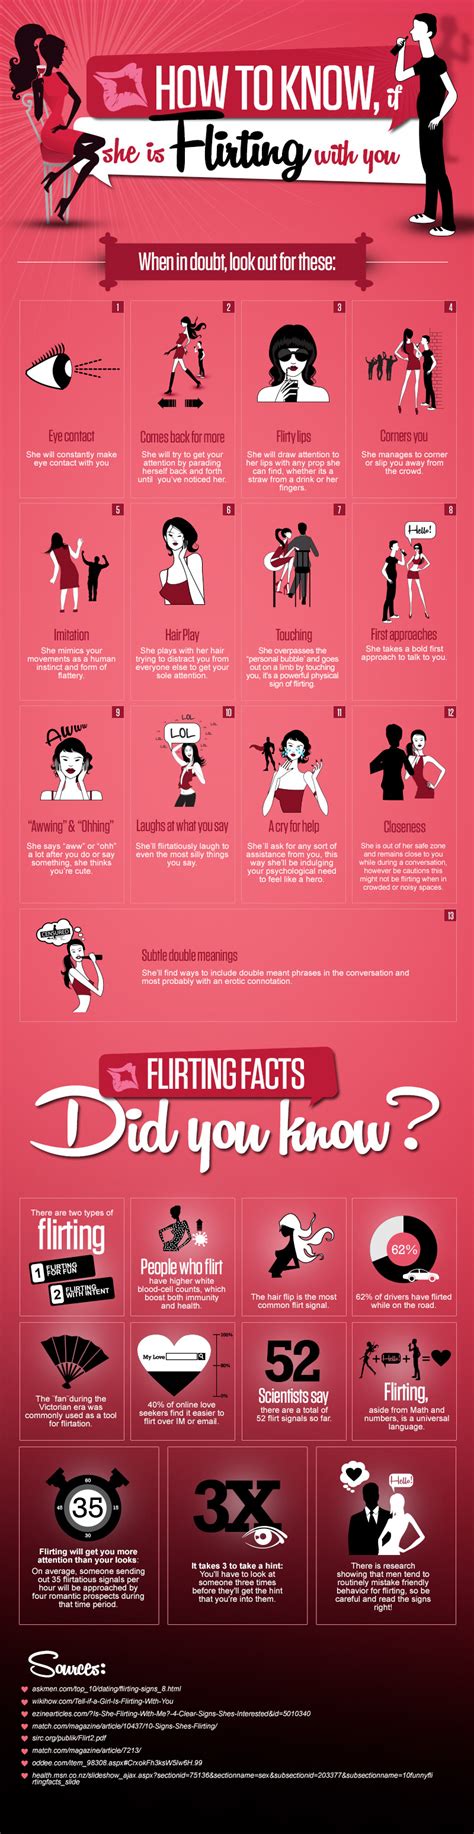 How To Know She Is Flirting With You [infographic]